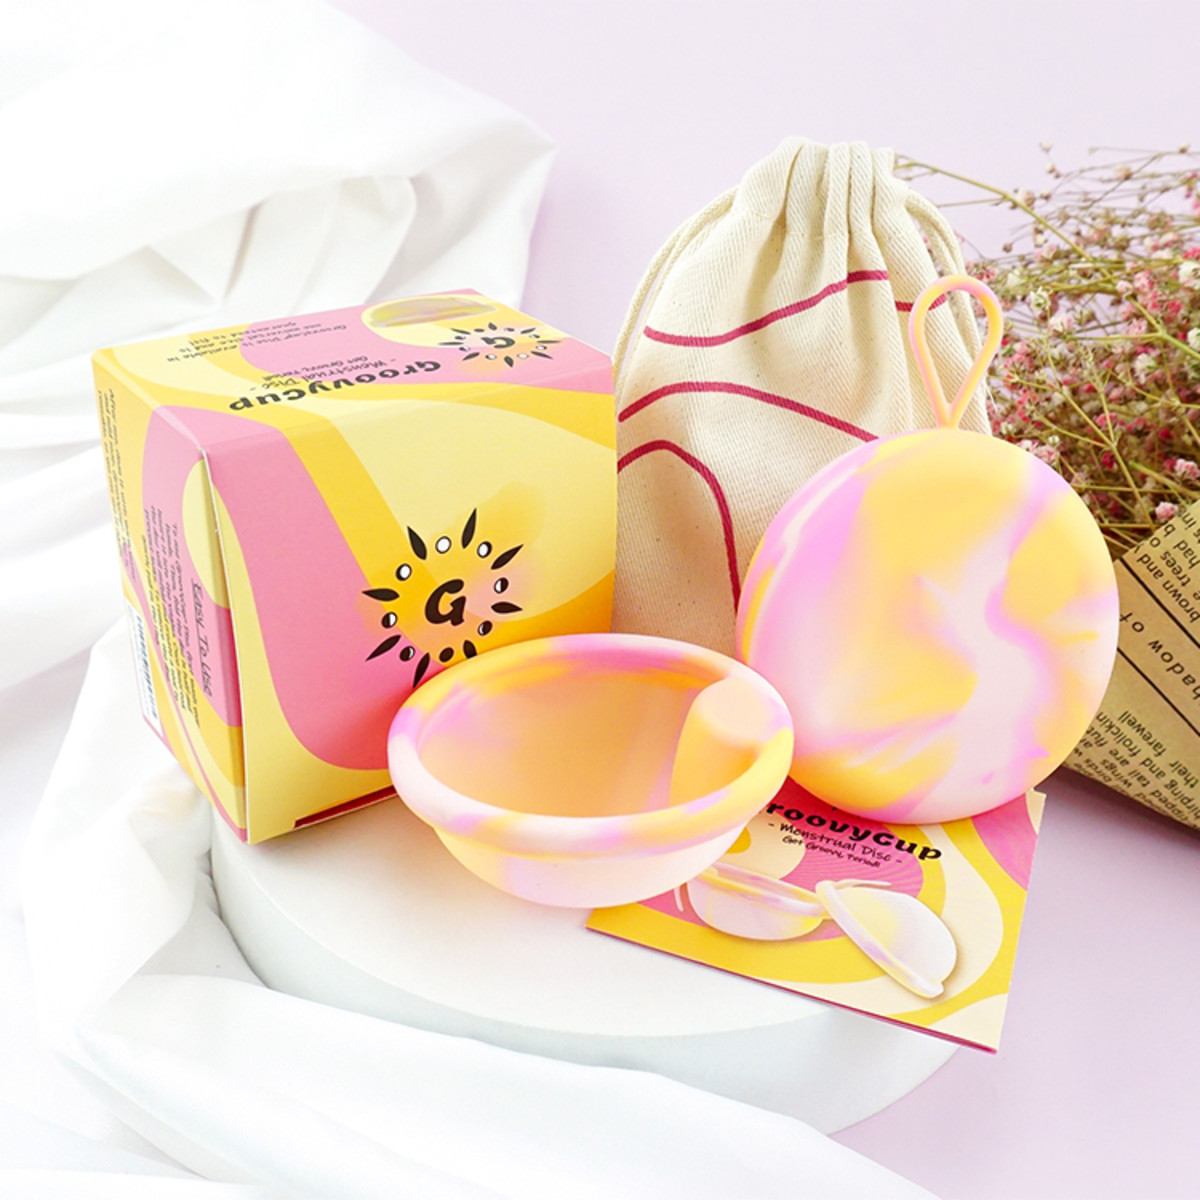 Eco-Friendly Groovy Cup Menstrual Discs Provide Women with a New Solution for Menstrual Care